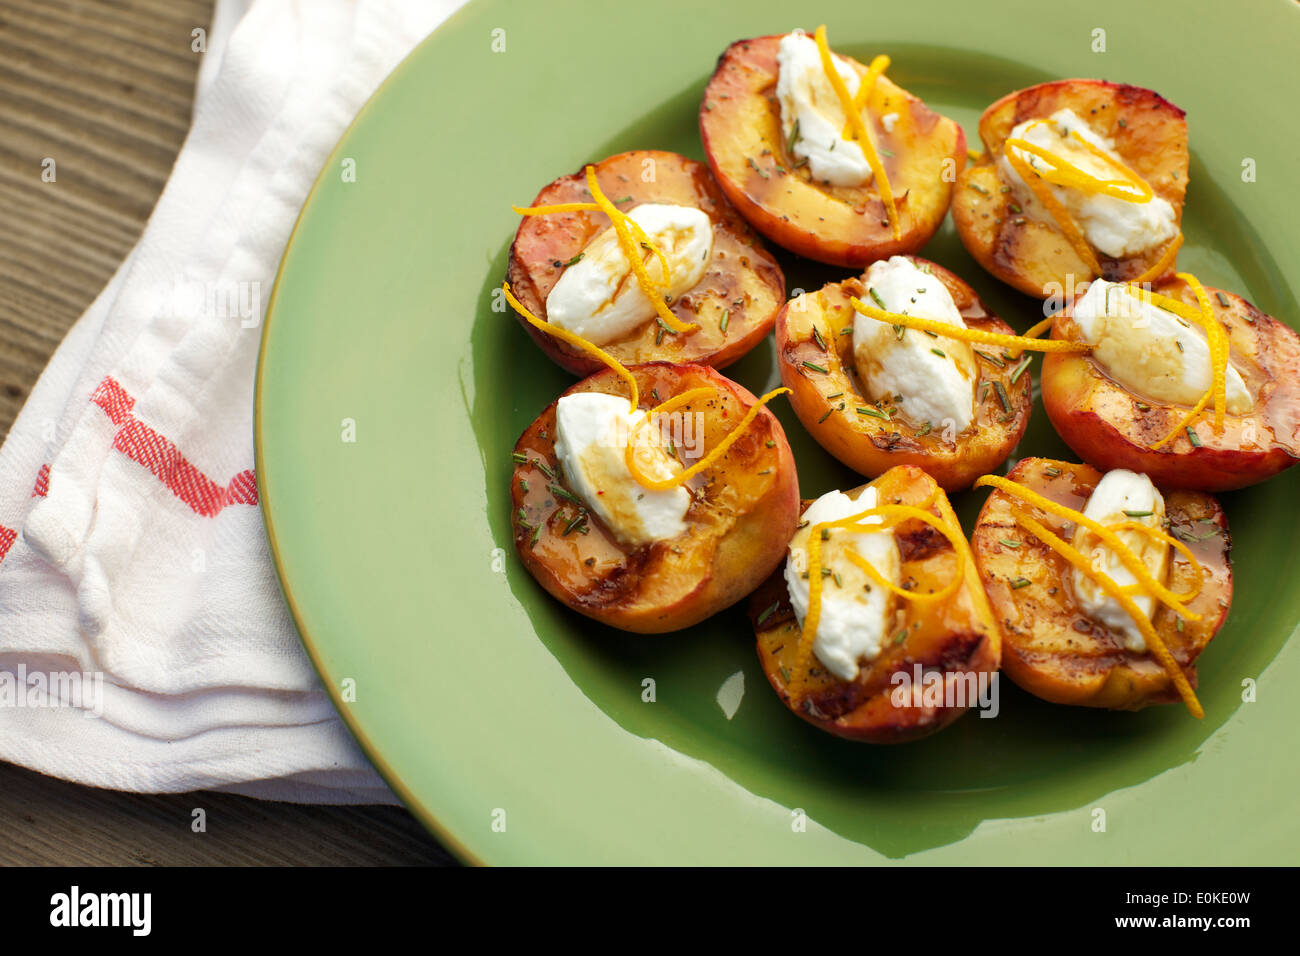 A plate of grilled peaches with creme fraiche, garnished with orange peels, chopped rosemary and balsamic vinegar. Stock Photo